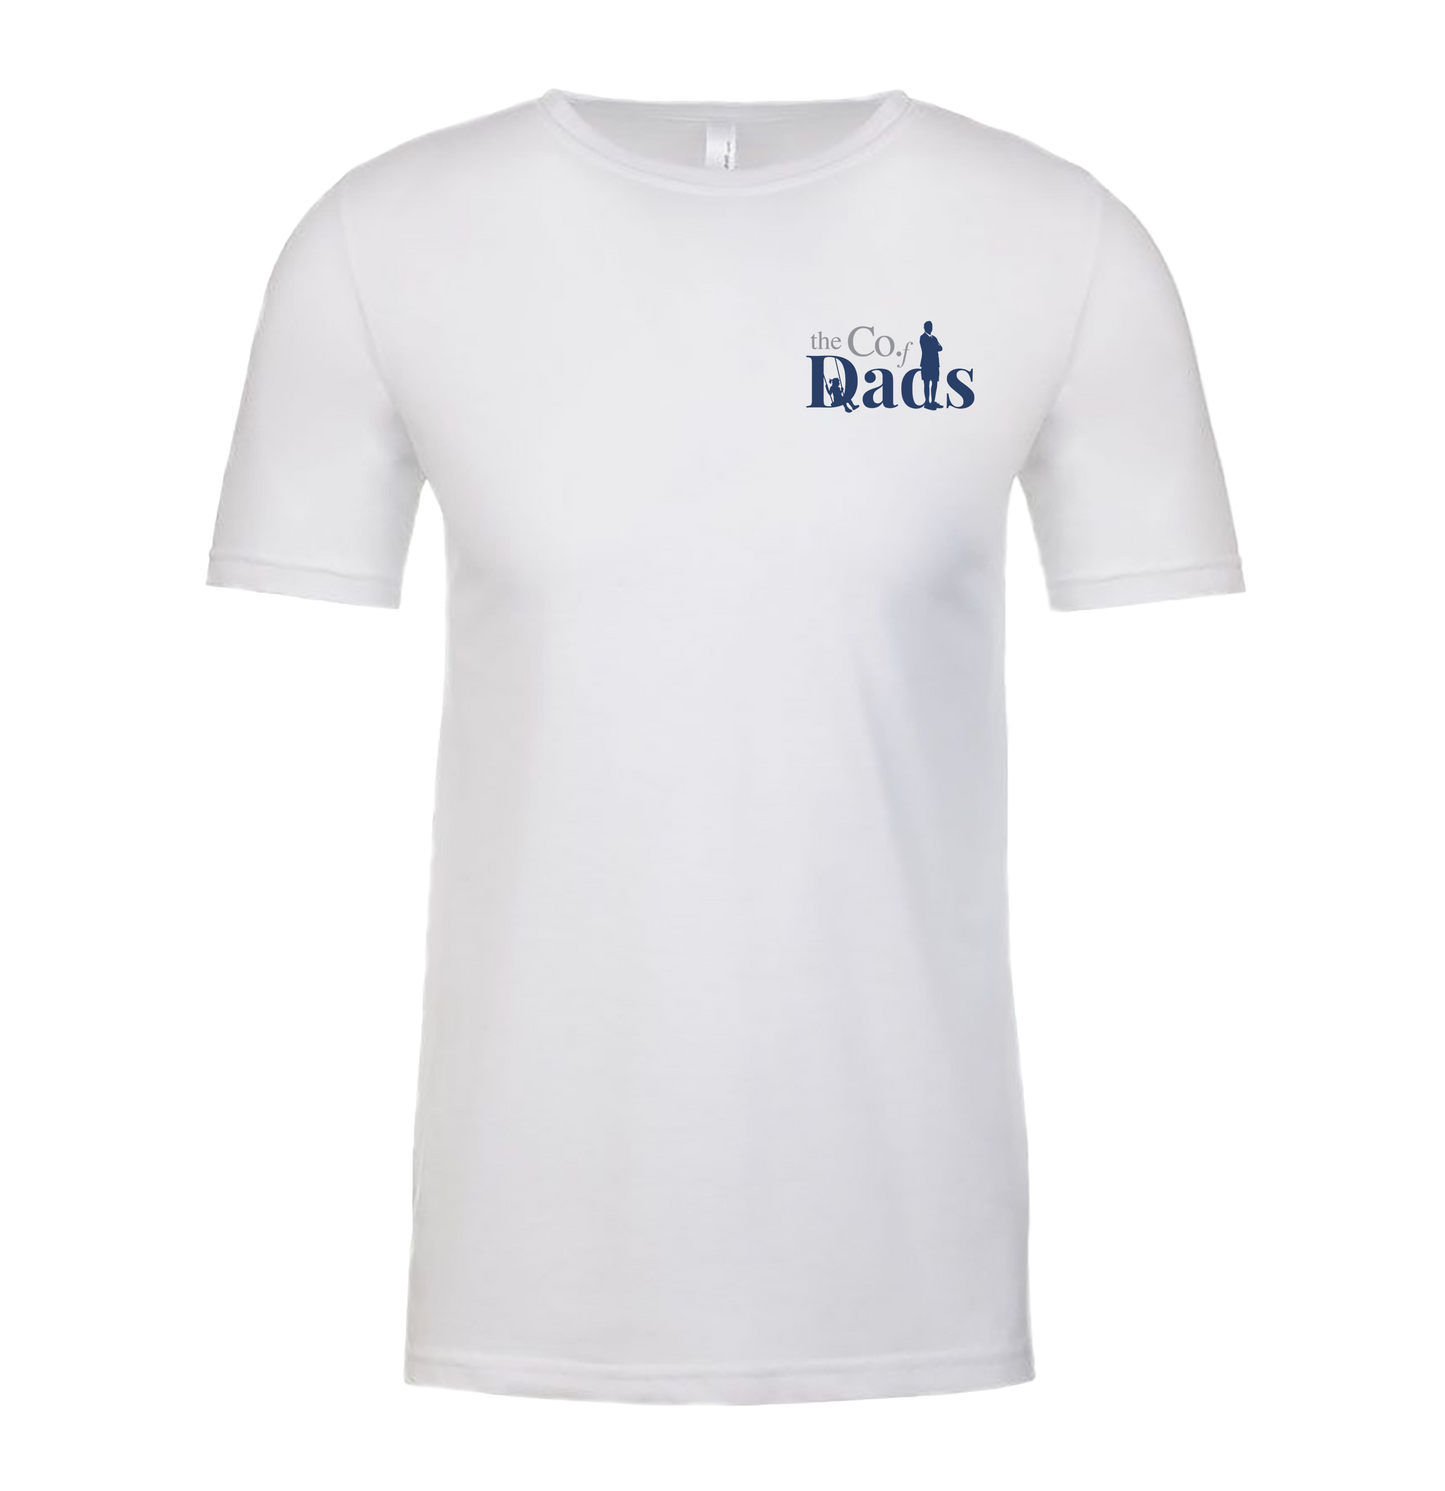 The Company of Dads Classic T-Shirt